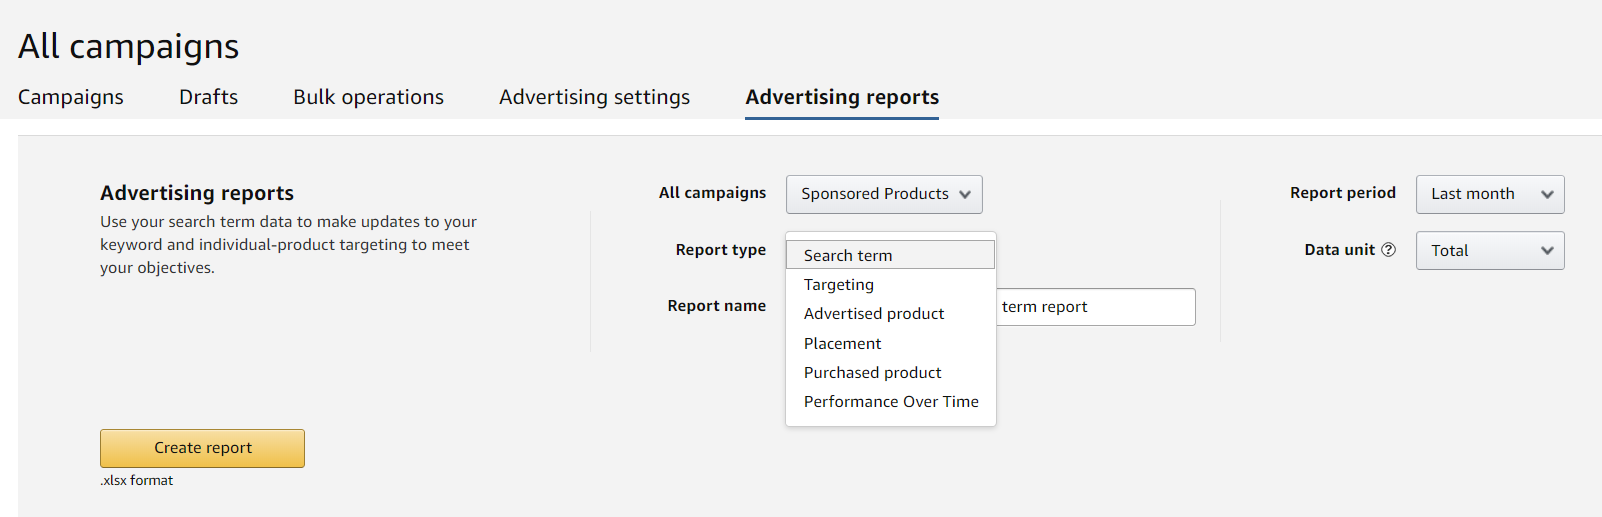 Advertising Reports